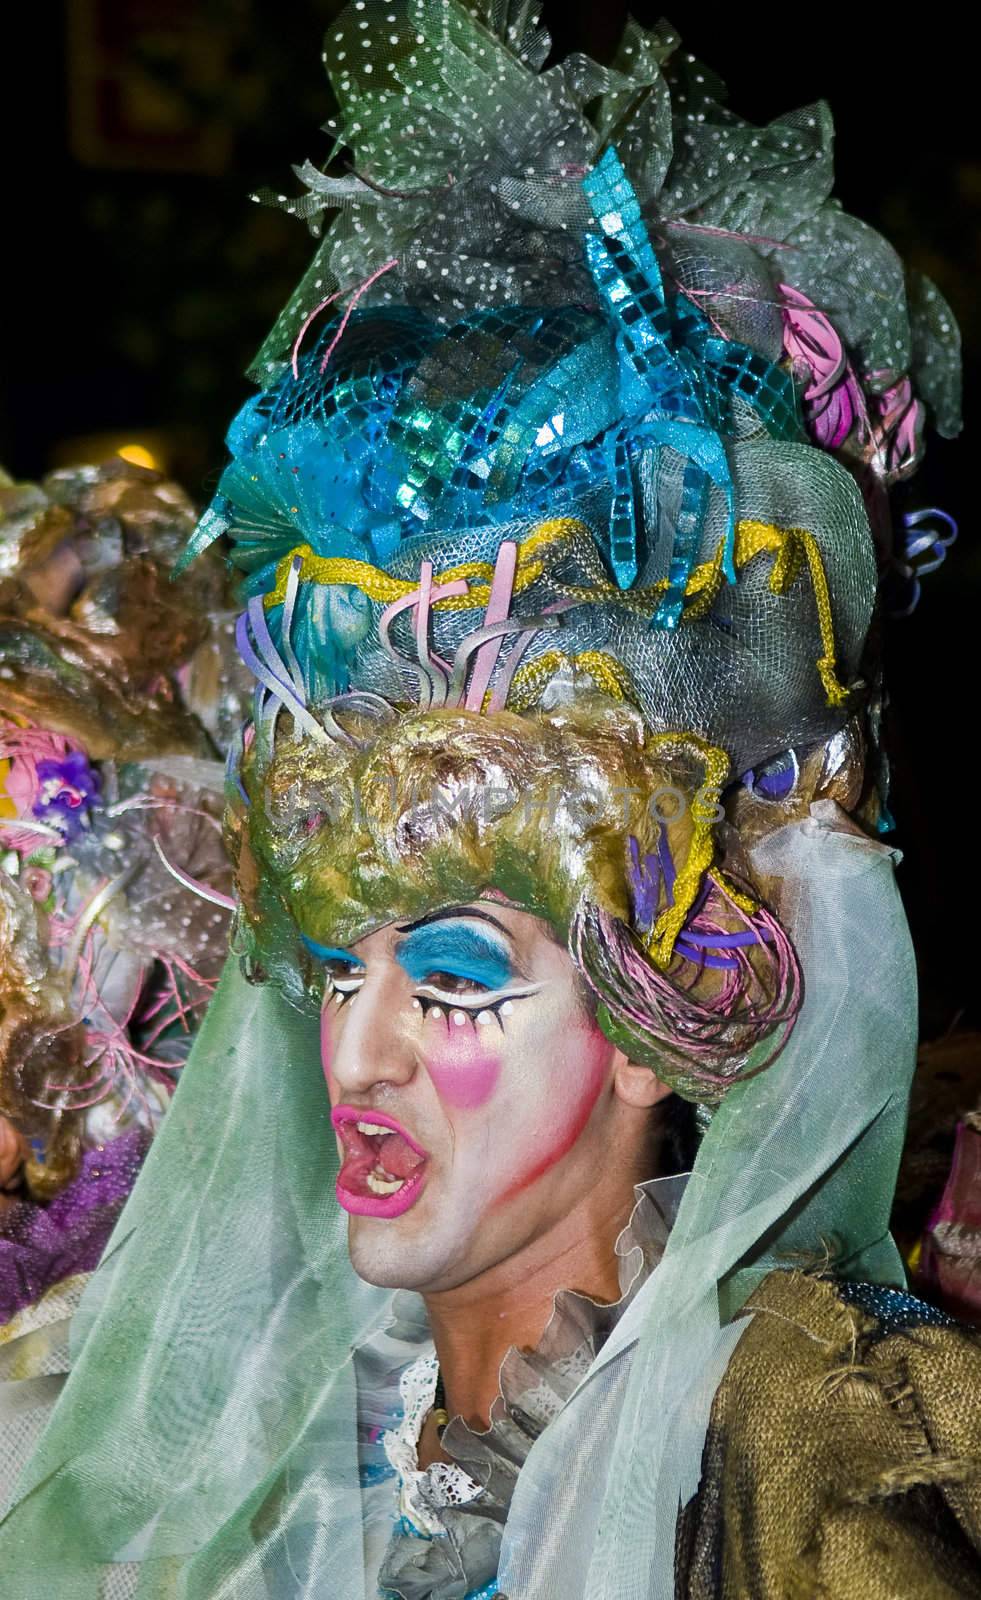 MONTEVIDEO, URUGUAY - JANUARY 27 2011 : A costumed carnaval participant in the annual national festival of Uruguay ,held in Montevideo Uruguay on January 27 2011 